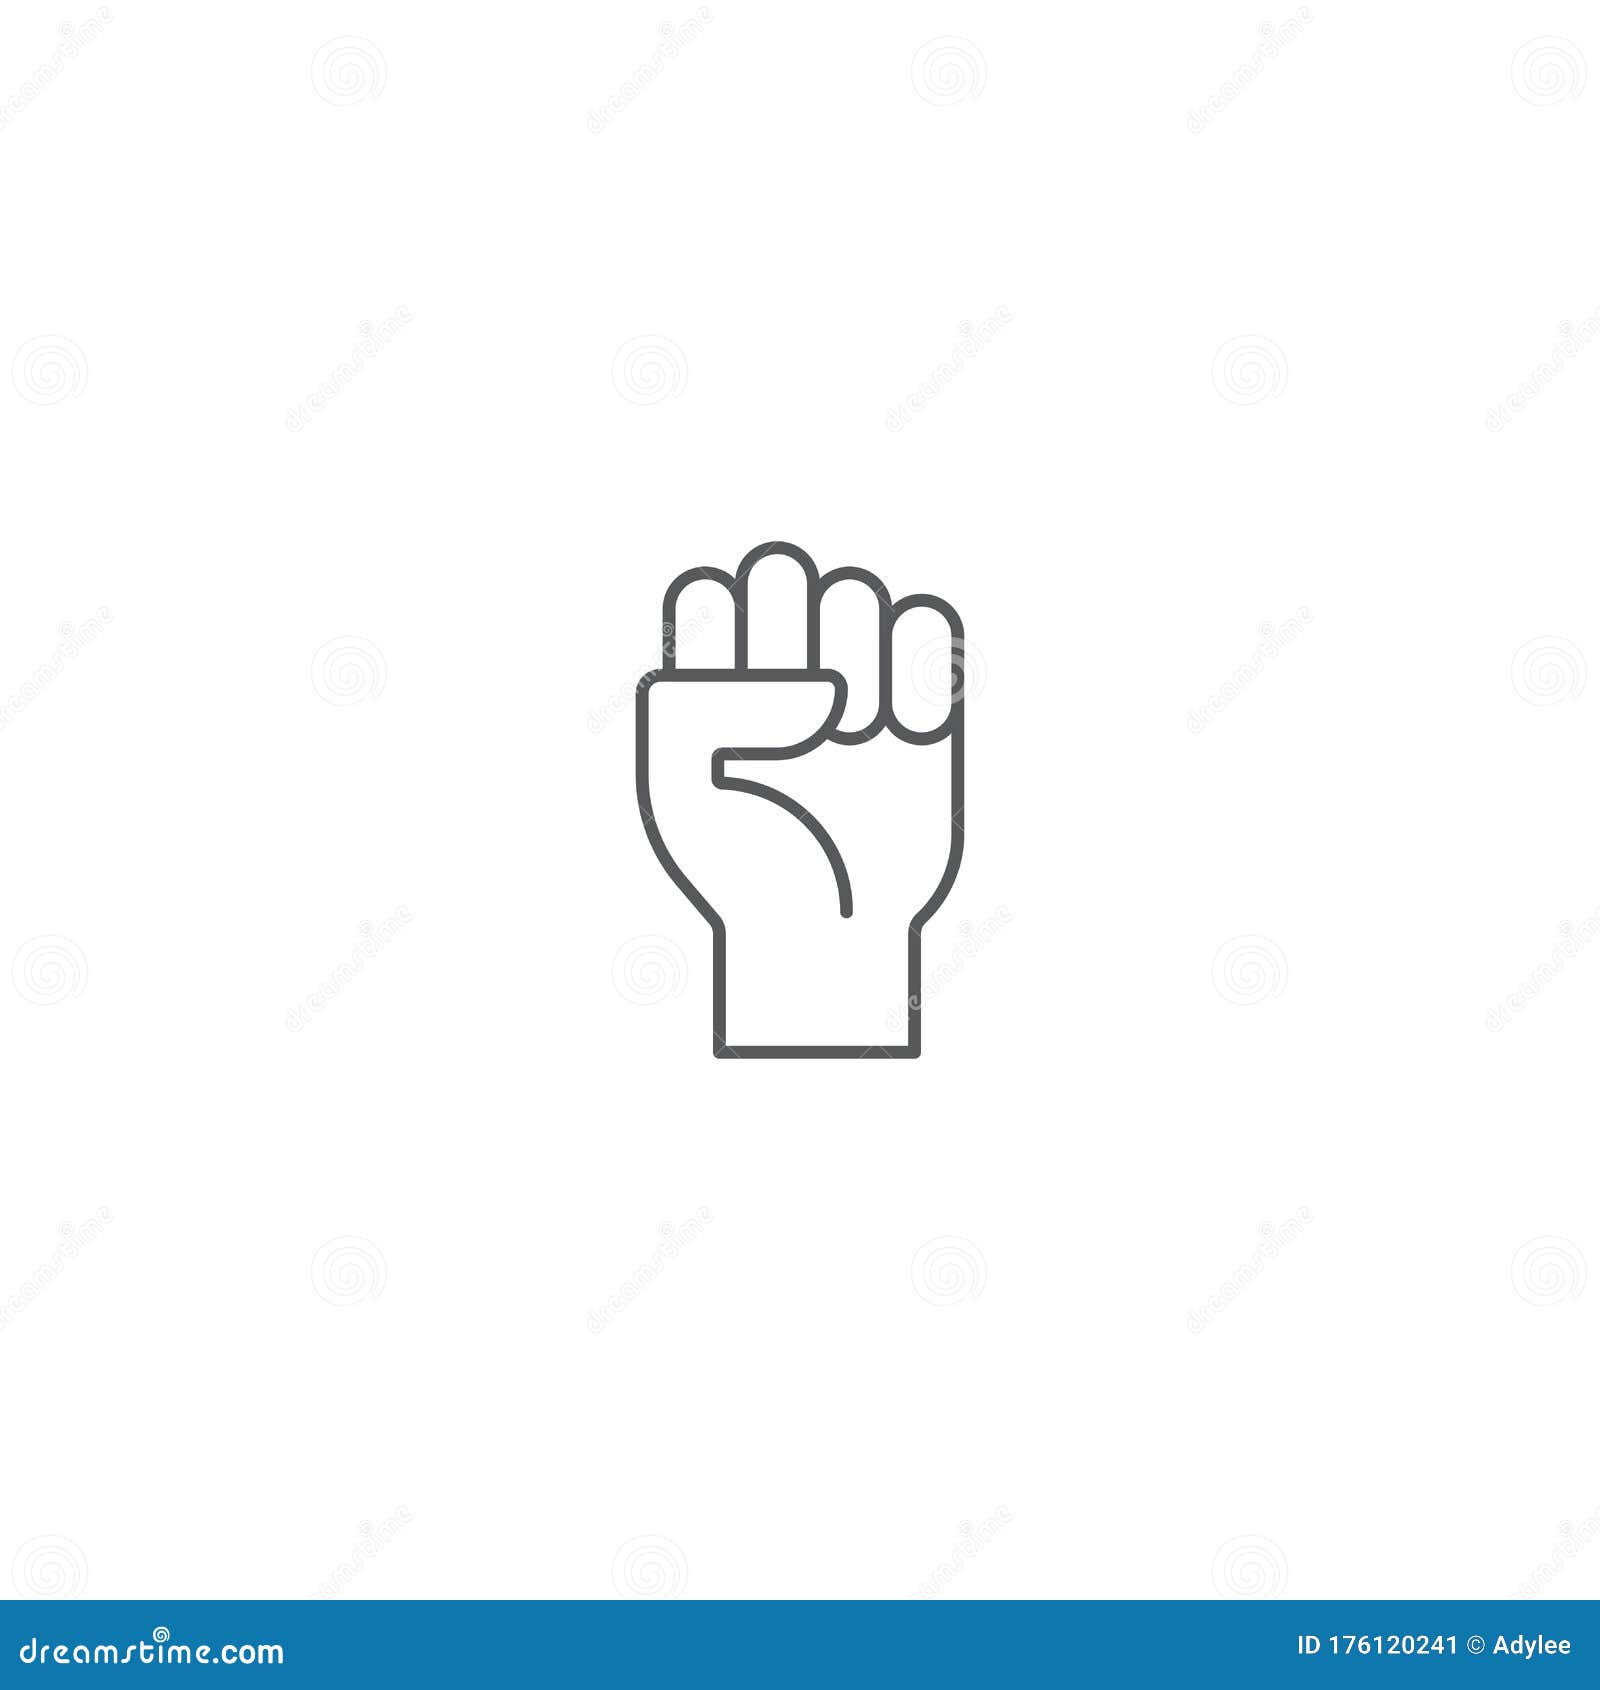 Fist Hand Up Gesture Vector Icon Symbol Isolated on White Background ...